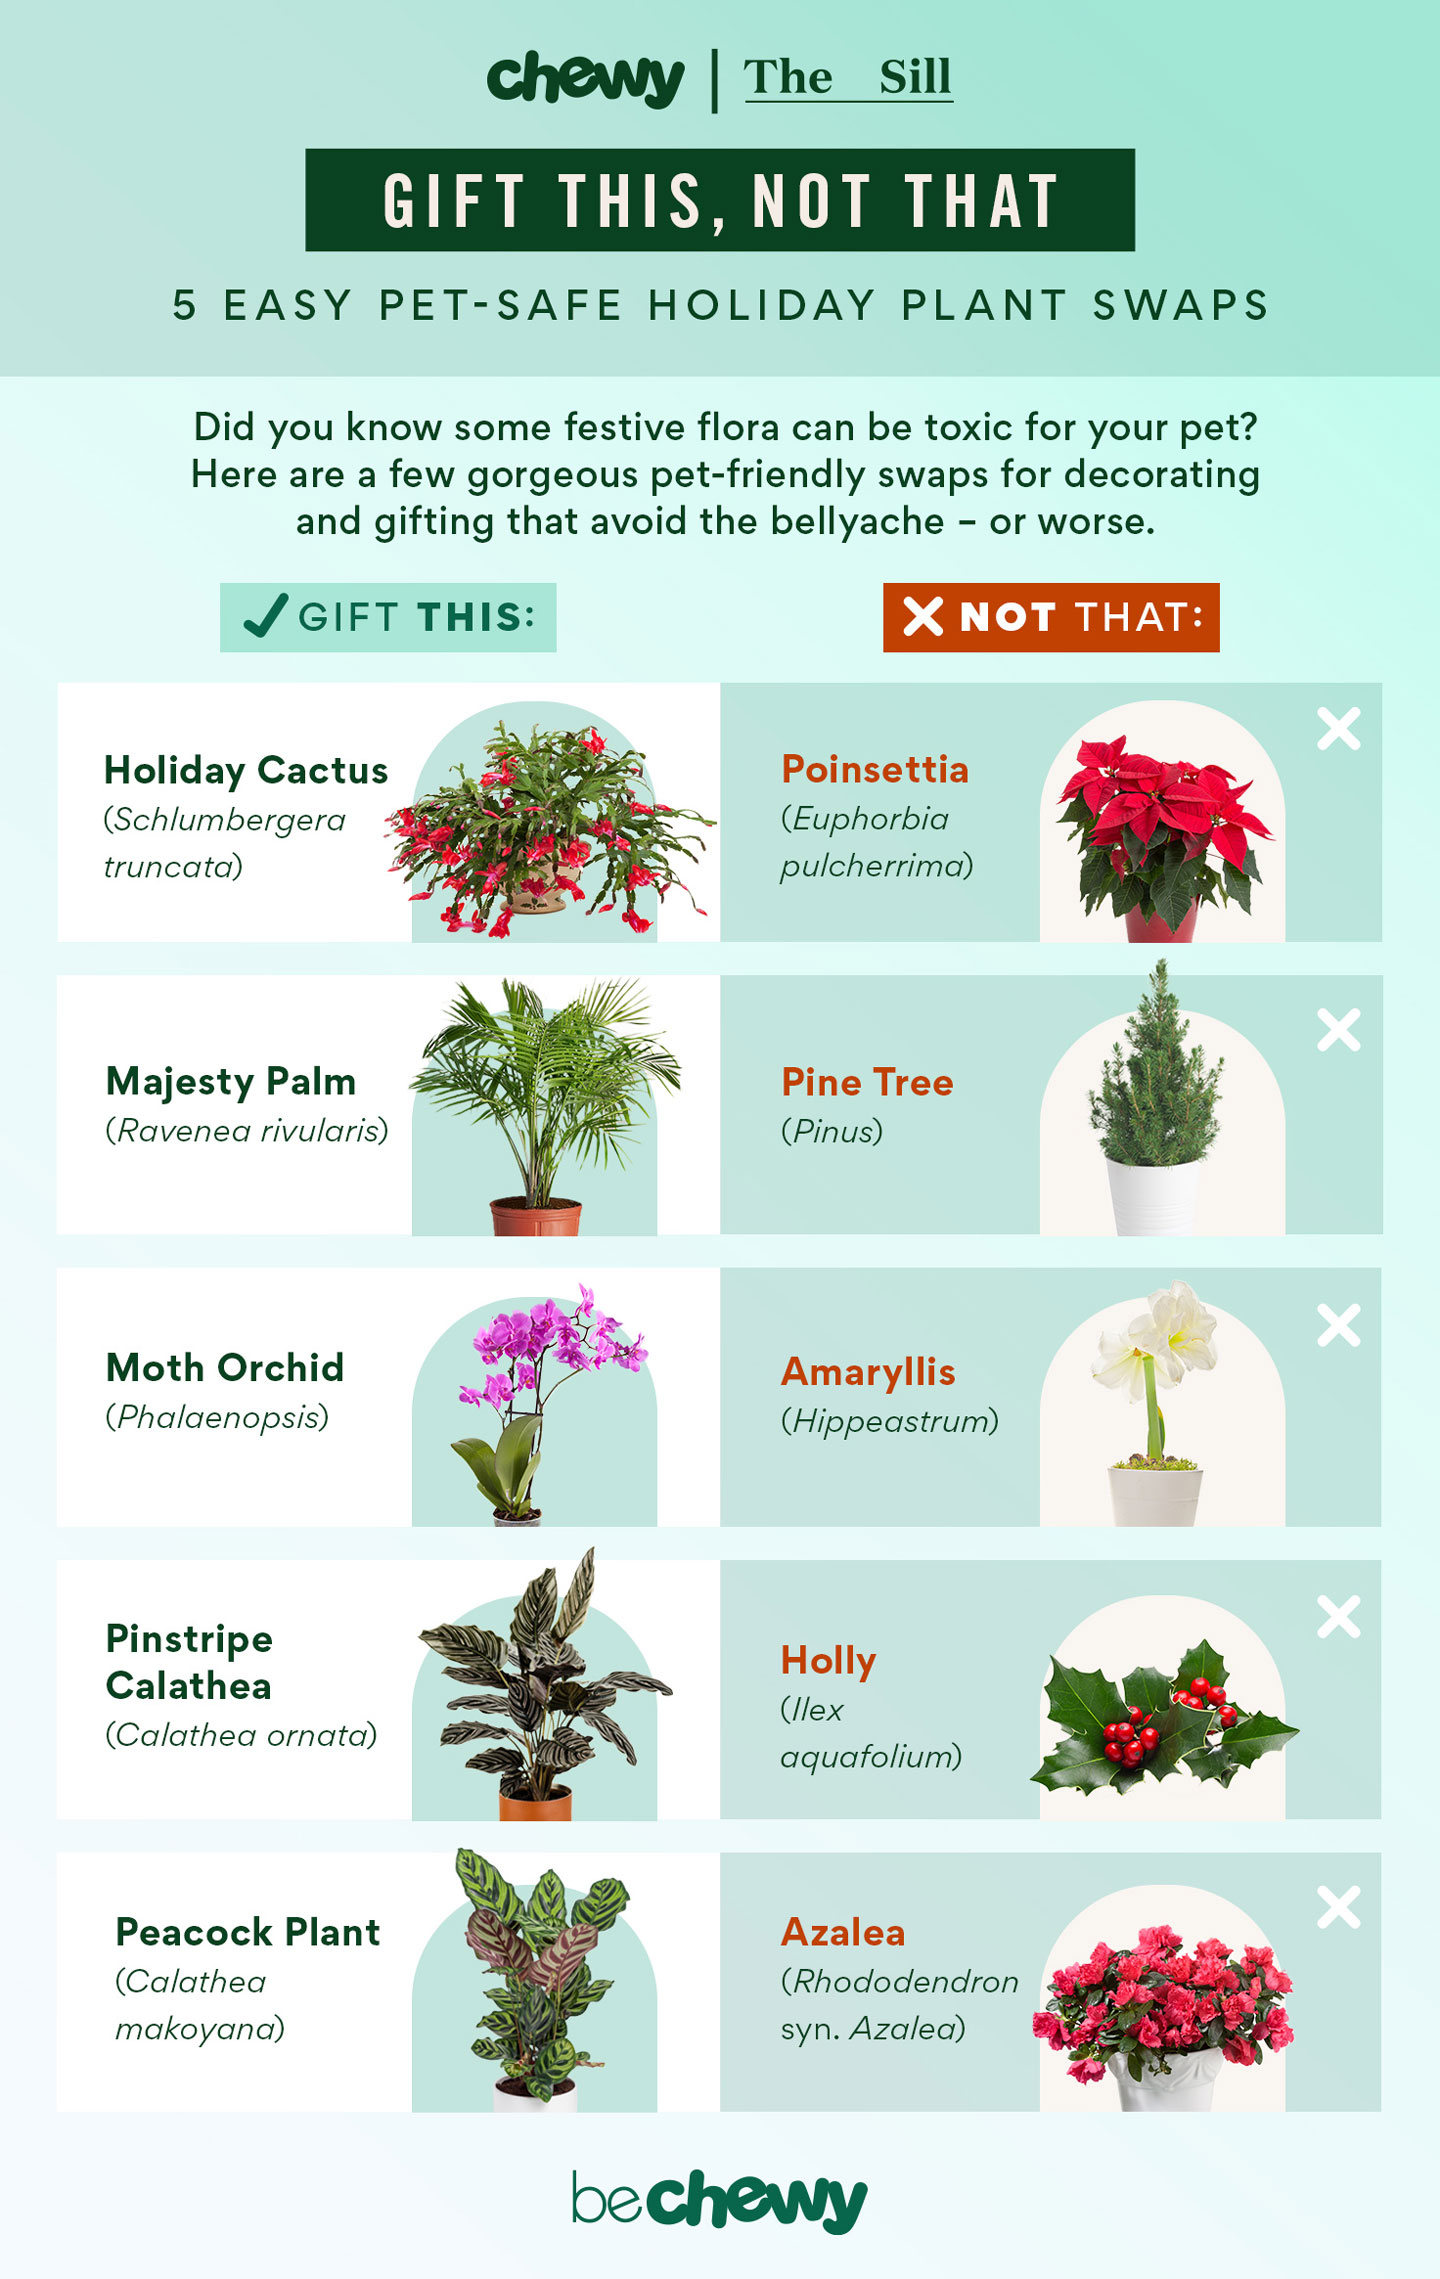 gift this, not that: 5 pet-safe holiday plants | bechewy